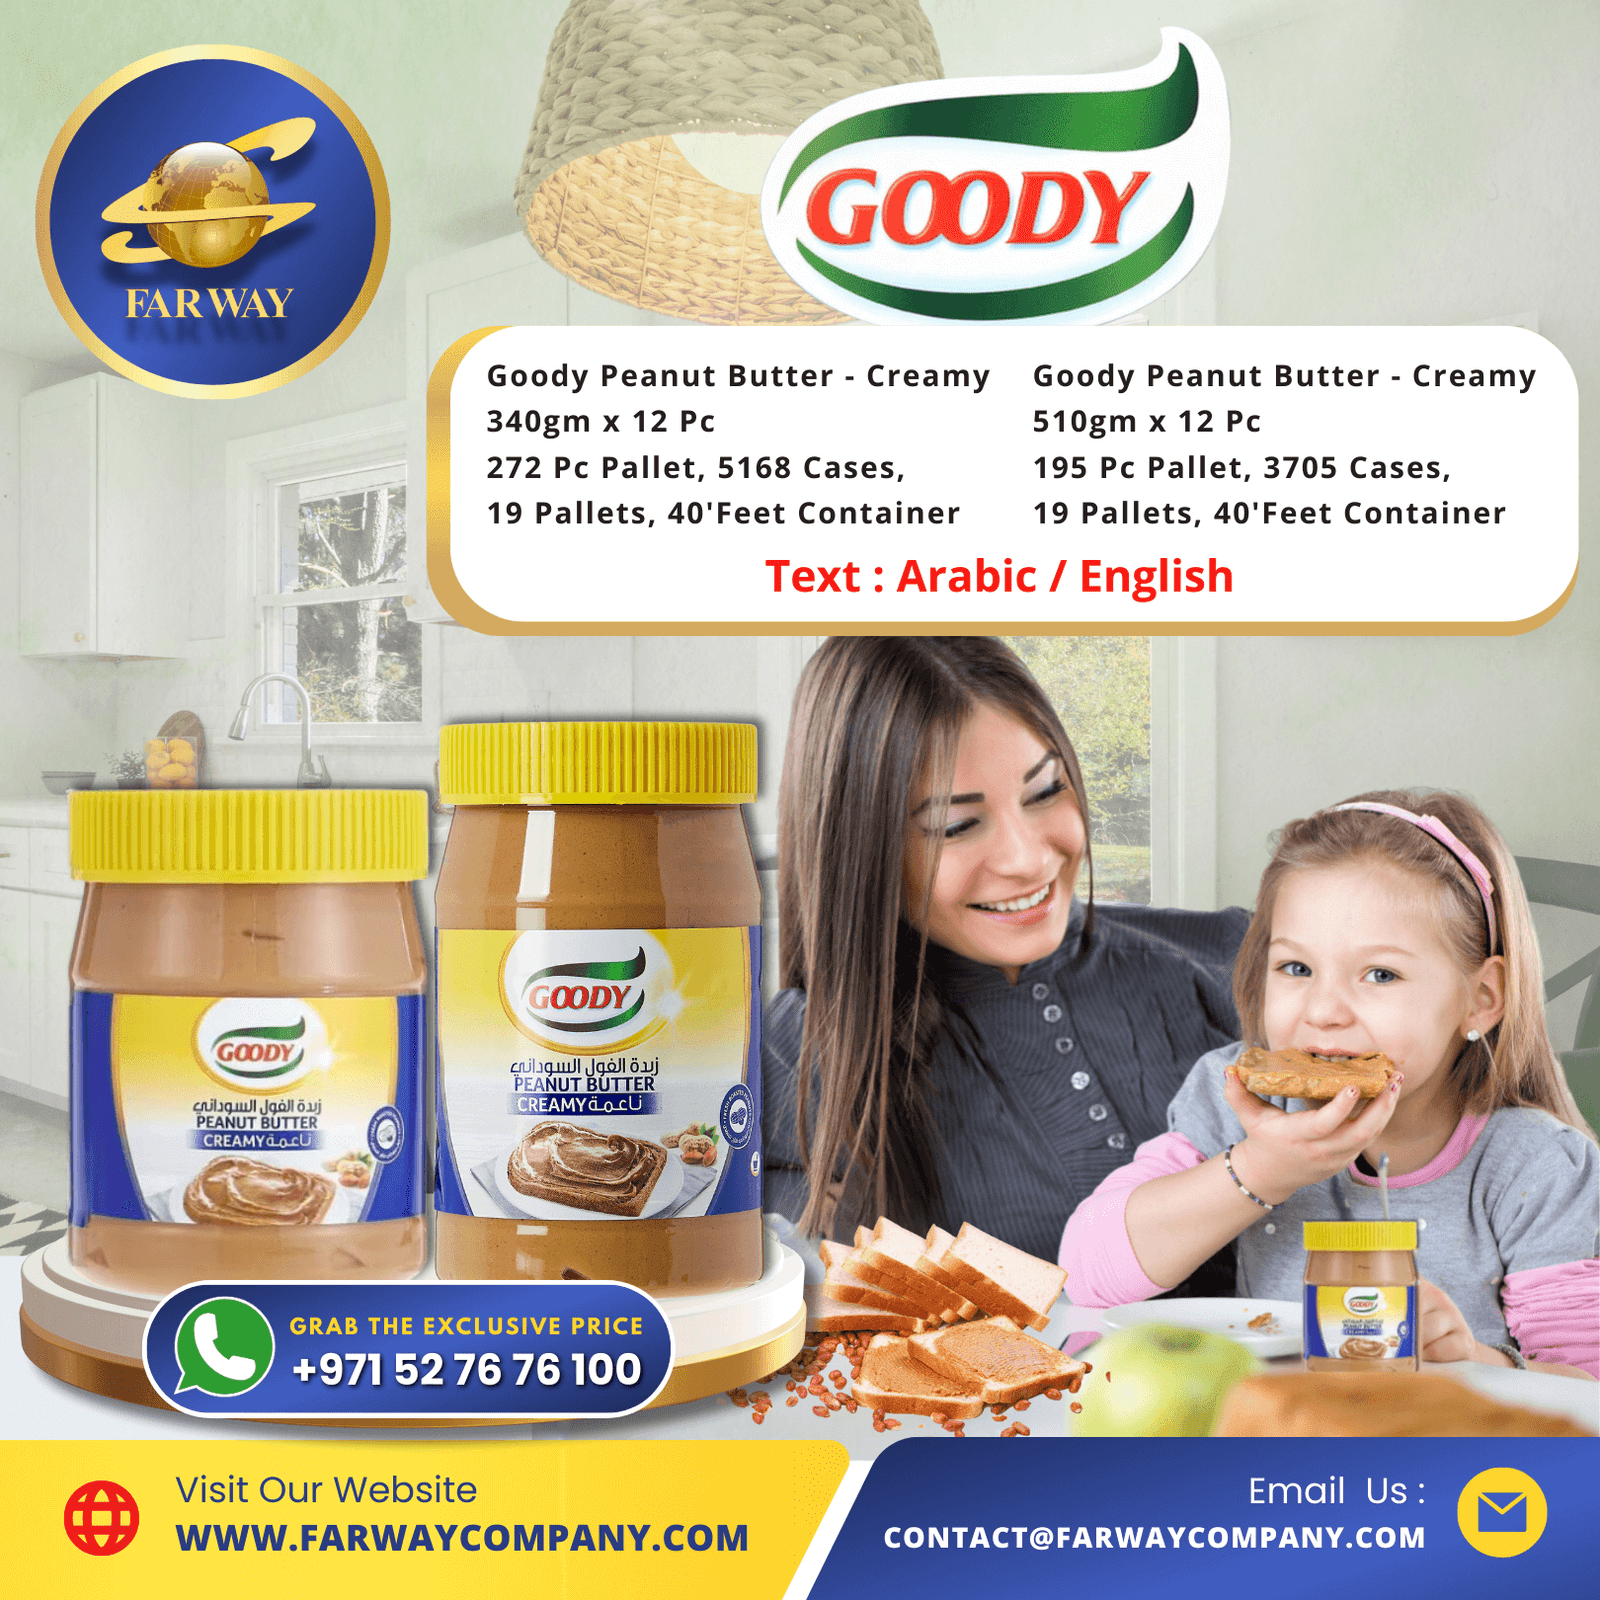 Goody Peanut Butter Importer / Exporter in Dubai, UAE, Middle East only at Far Way